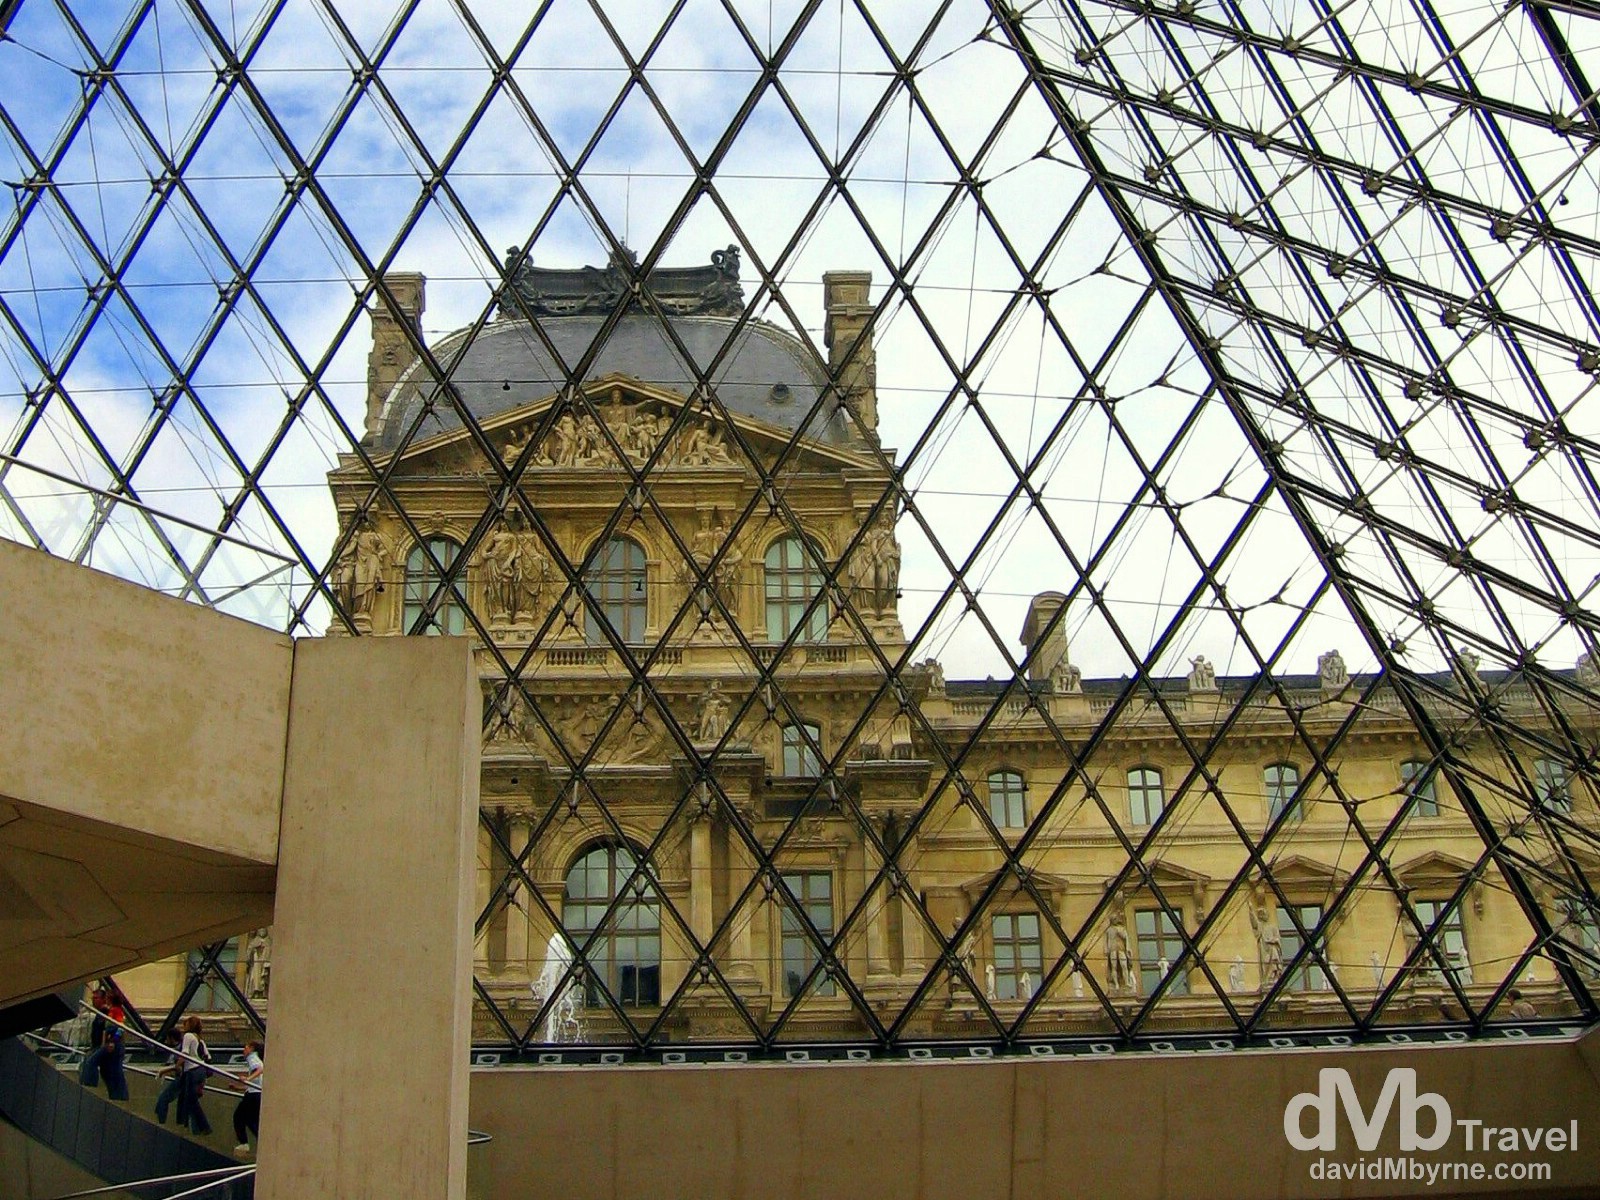 Part of the Richelieu wing as seen through the Pyramid from the Cour Napoléon (Napoleons court), Louvre Museum, Paris, France. August 19th, 2007.